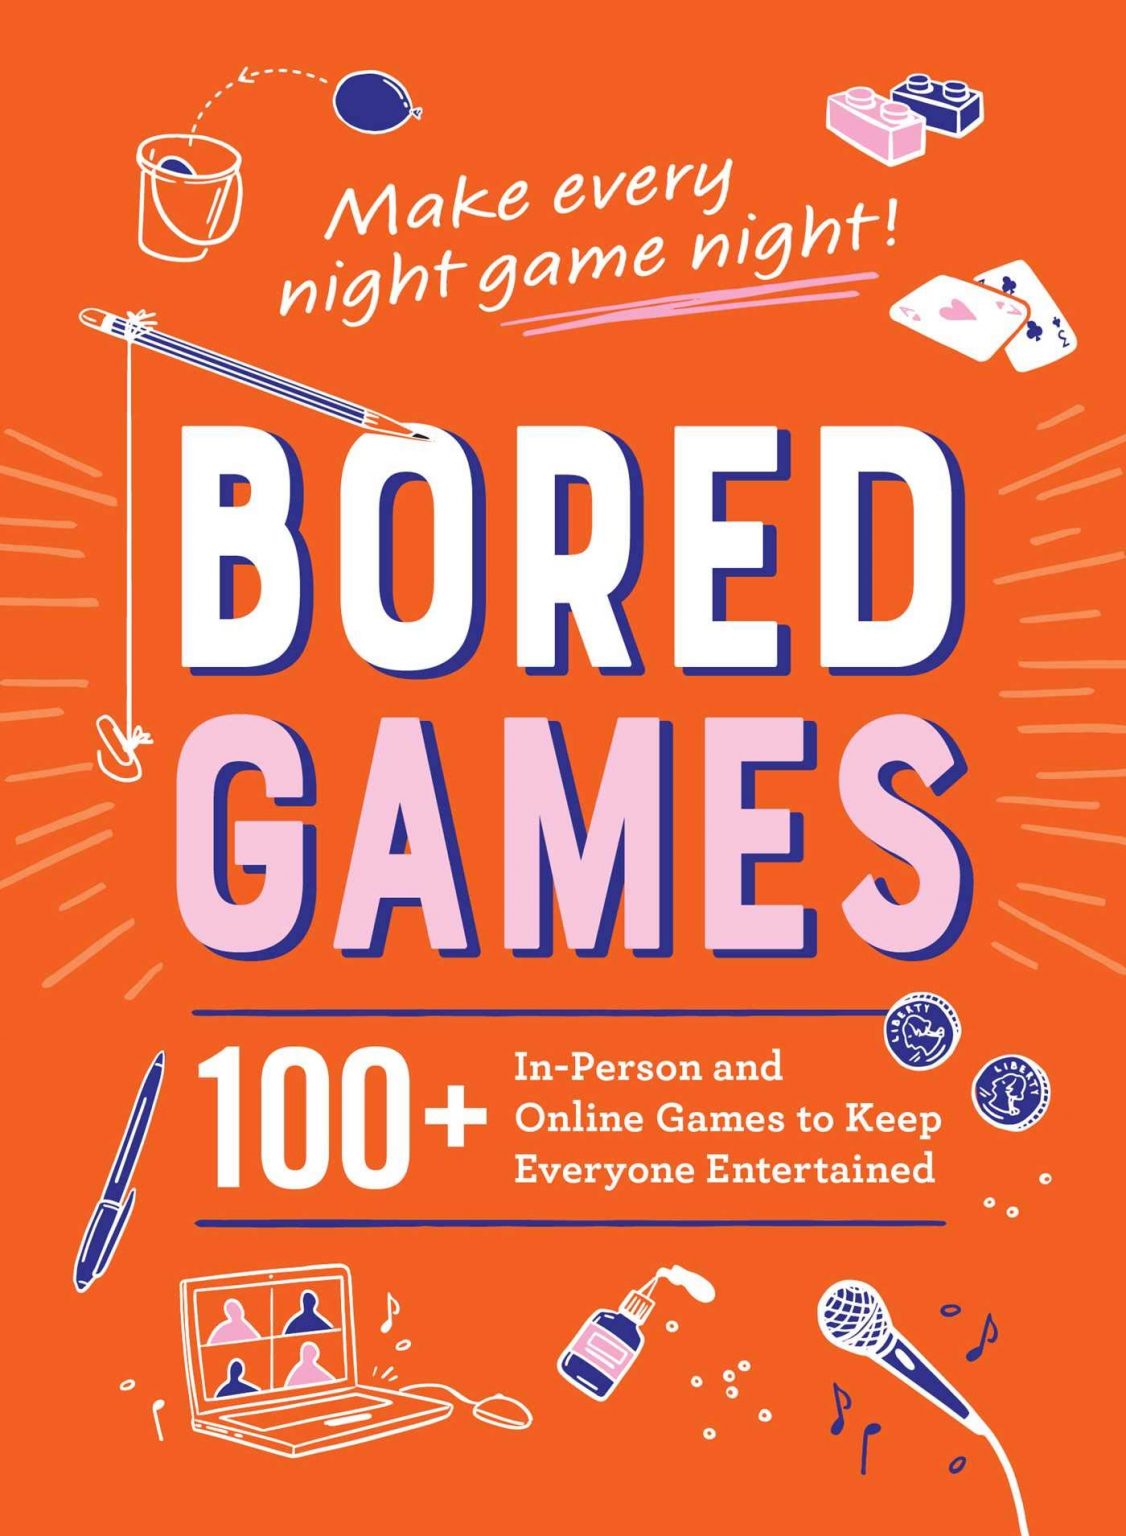 ibored games